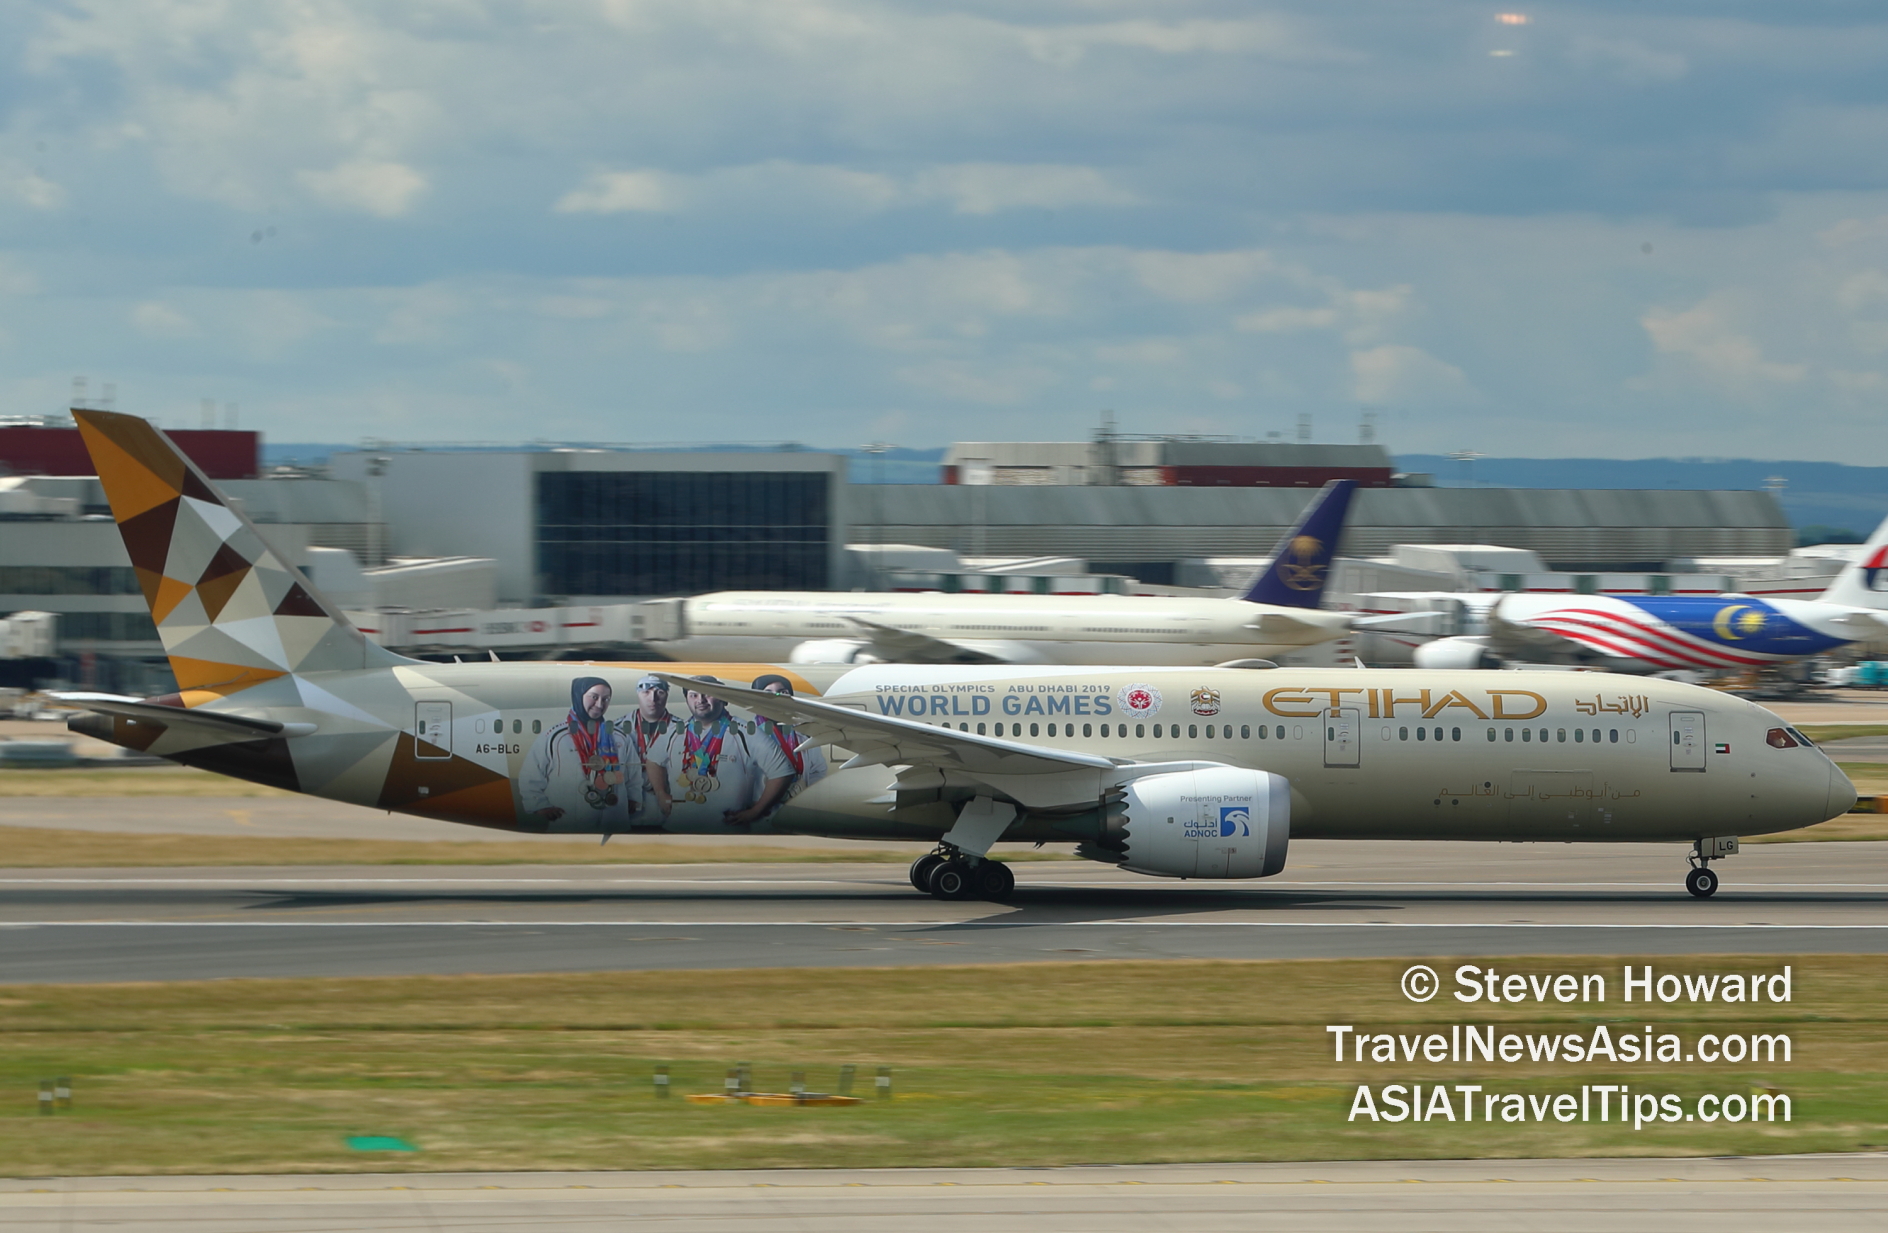 Etihad Airways B787-9 reg: A6-BLG. Picture by Steven Howard of TravelNewsAsia.com Click to enlarge.